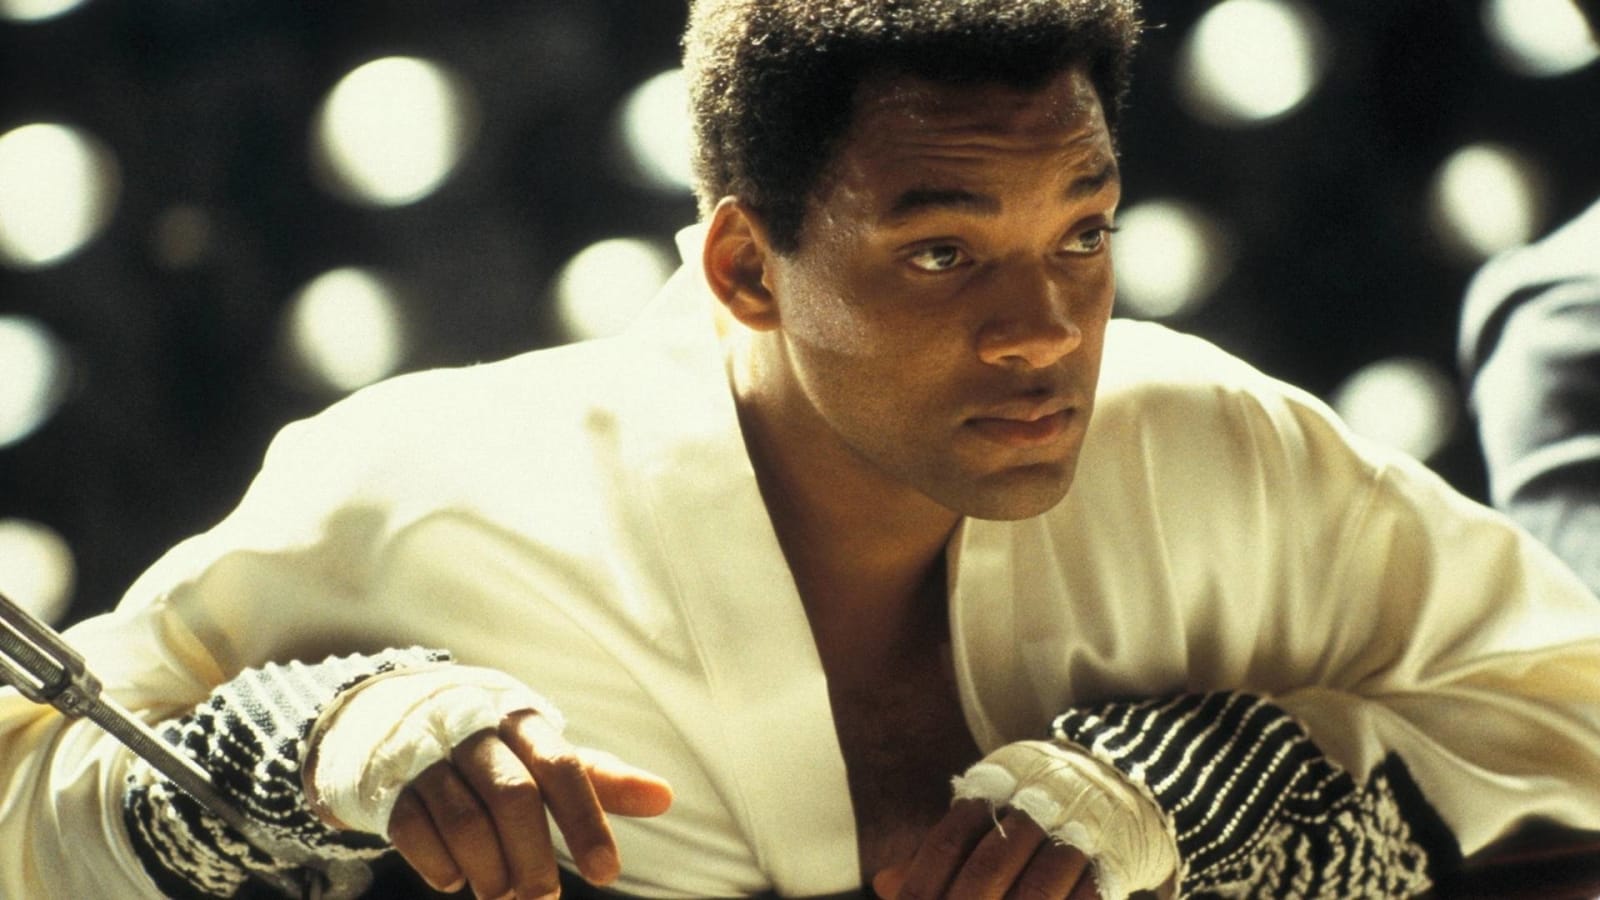 The 25 best movie roles of Will Smith's career